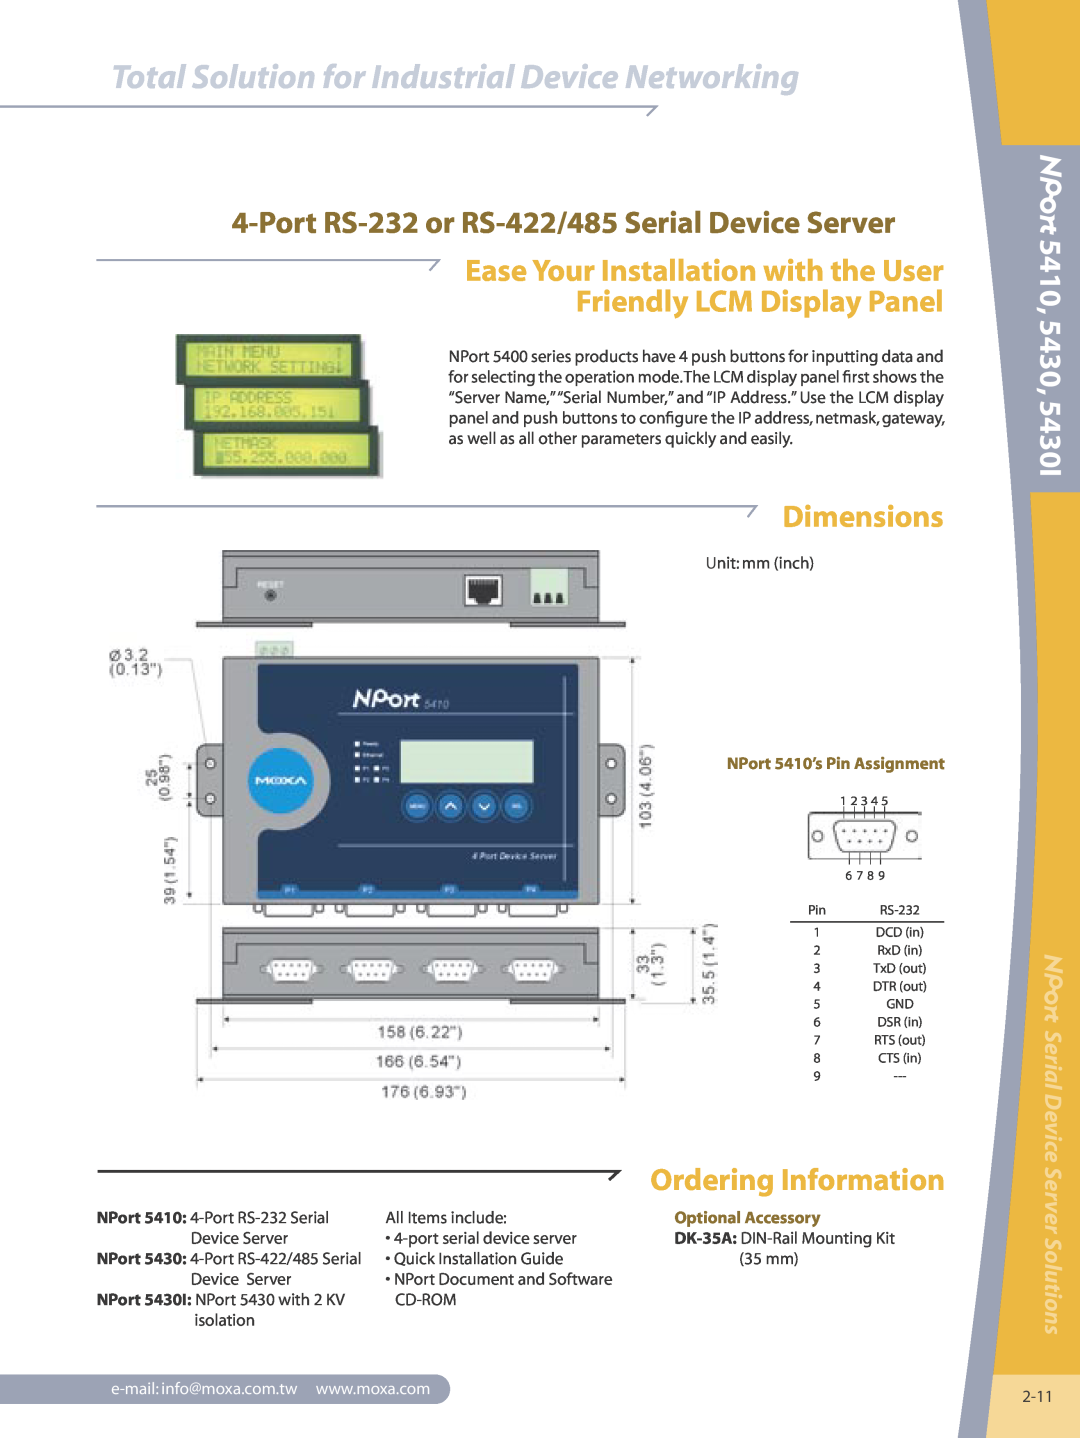 Moxa Technologies 5430I Port RS-232 or RS-422/485 Serial Device Server, Dimensions, 5410, 5430, Ordering Information 